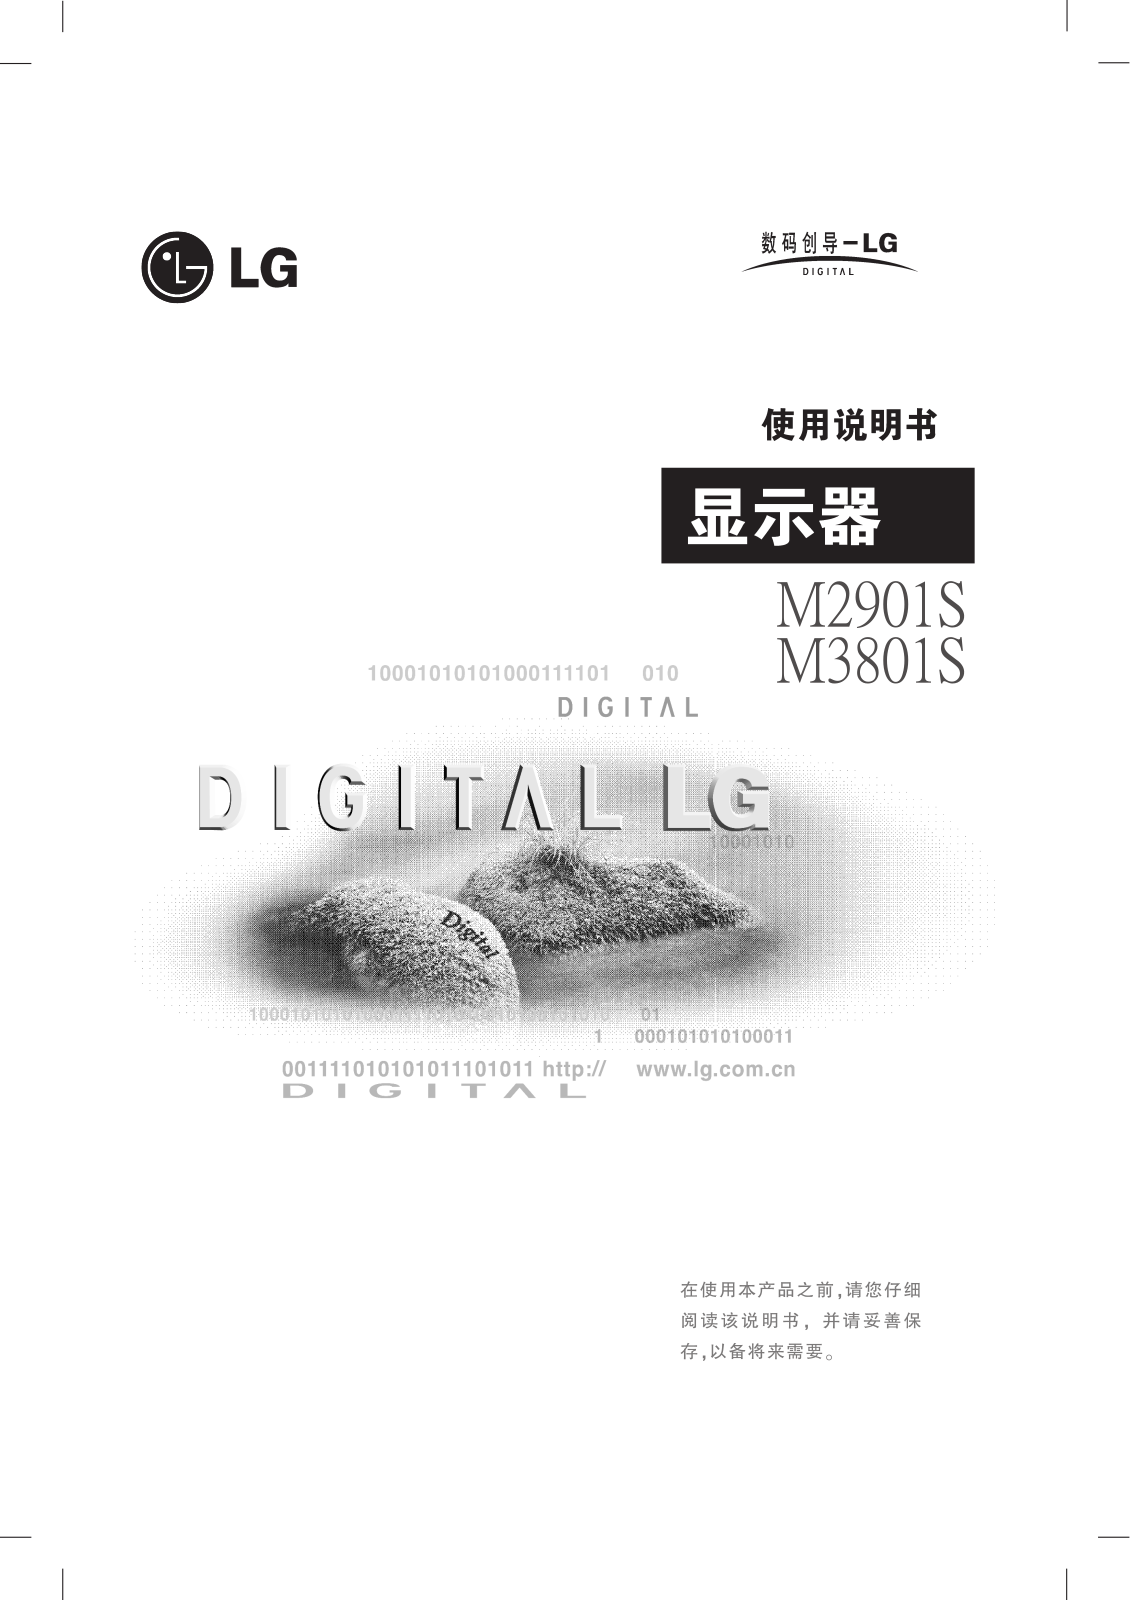 LG M2901SCBN Owner’s Manual